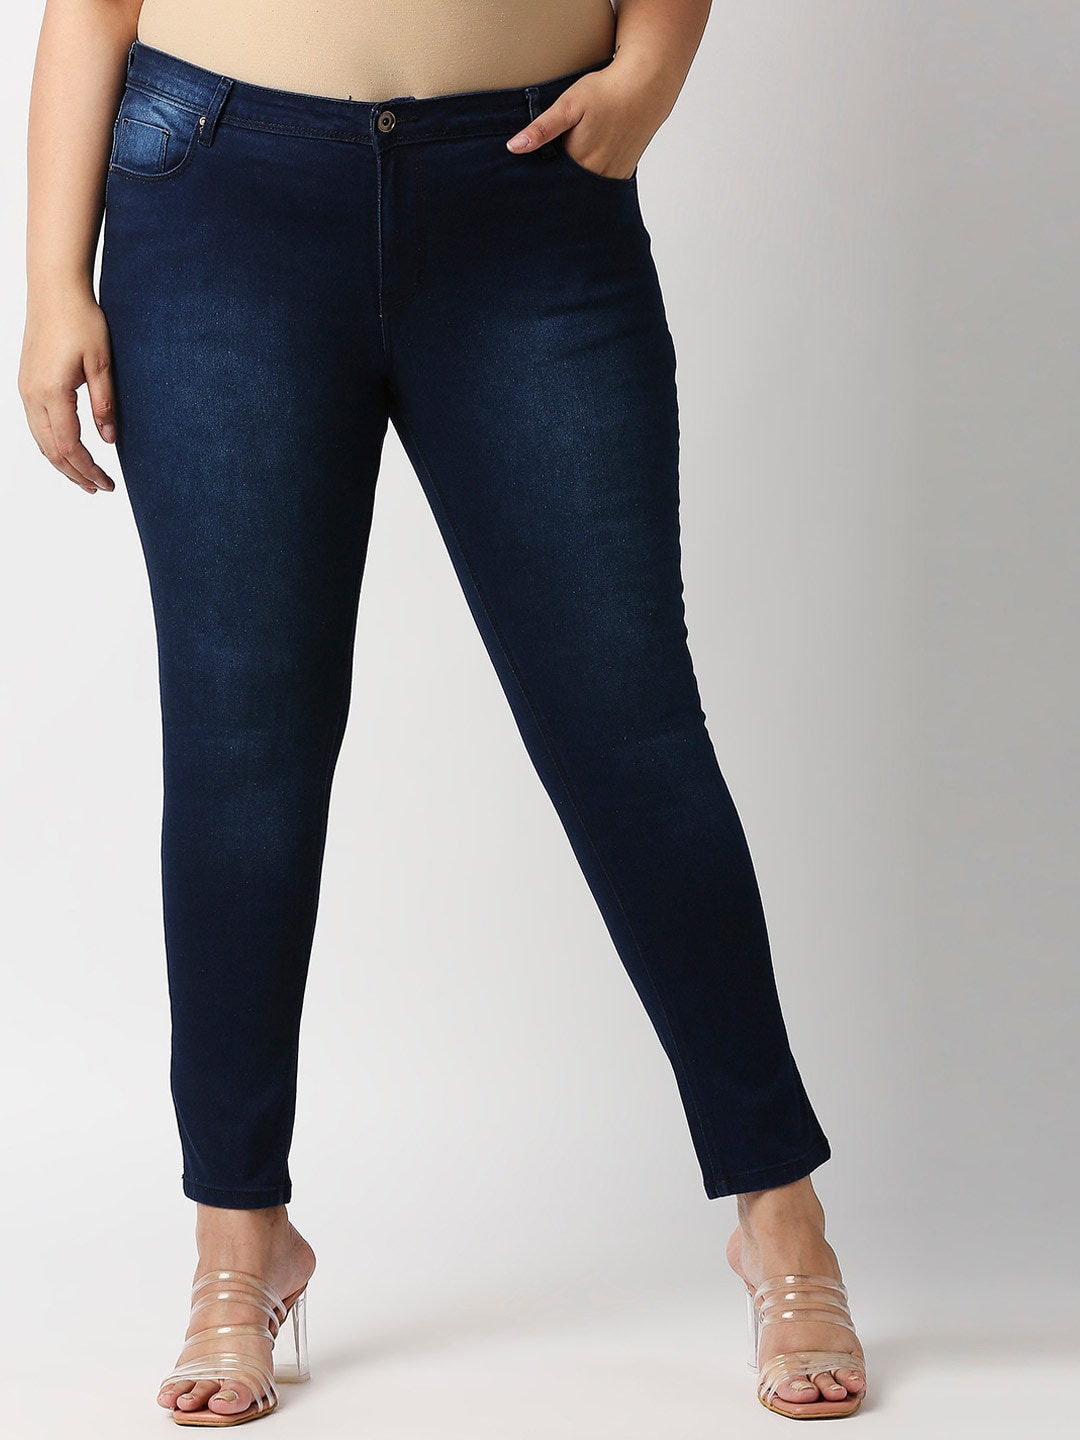 High Star Plus Size Women Blue Slim Fit Light Fade Stretchable Jeans Price in India